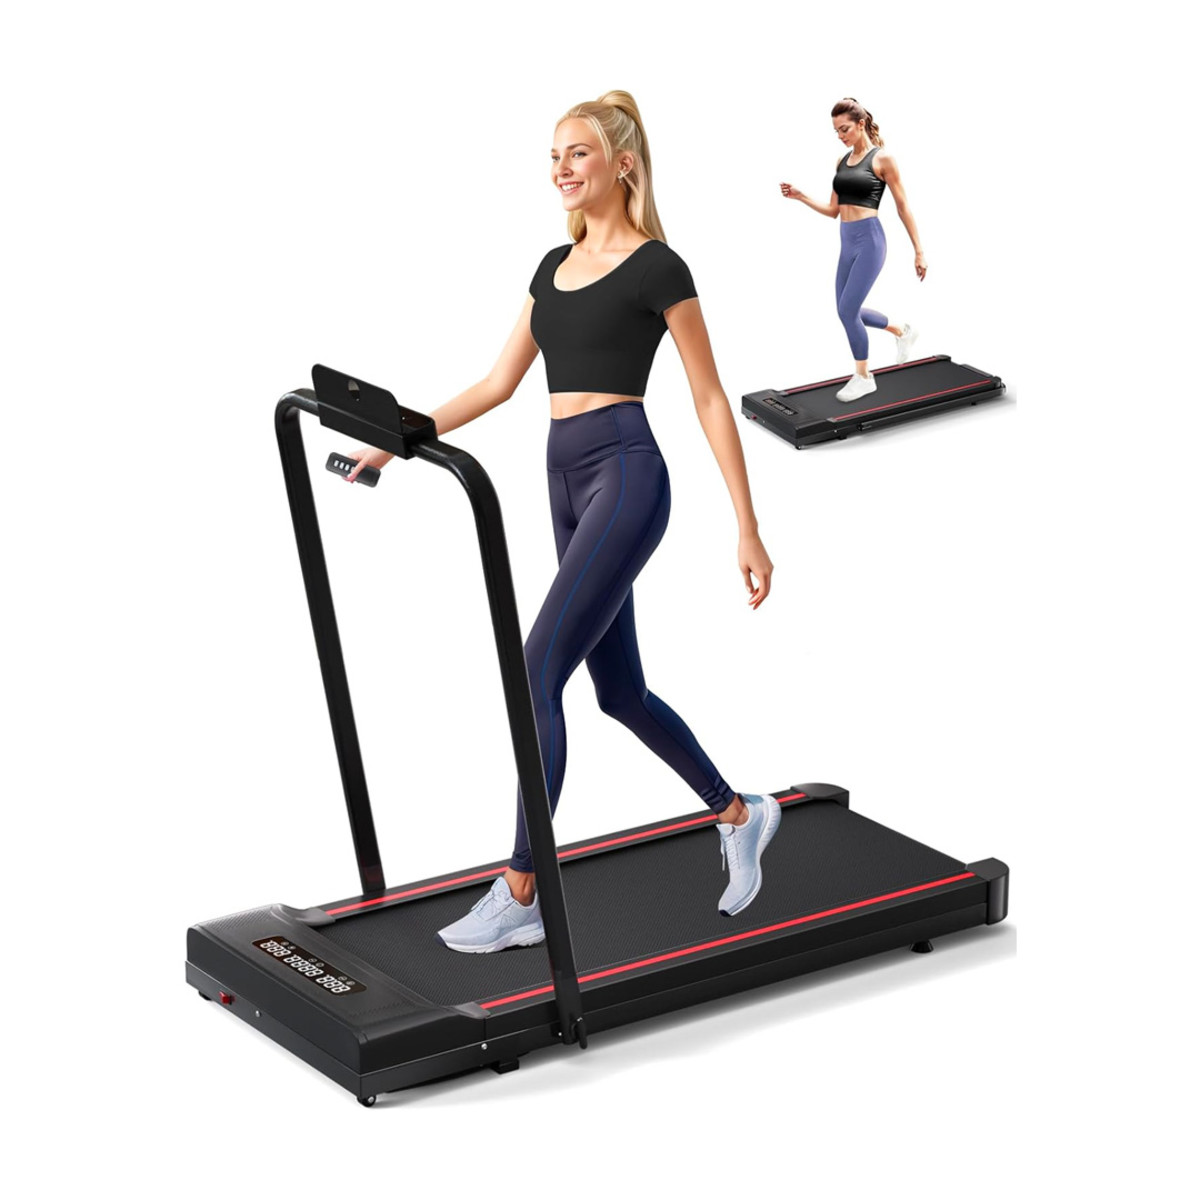 10 top rated walking pads and folding treadmills for at home workouts 